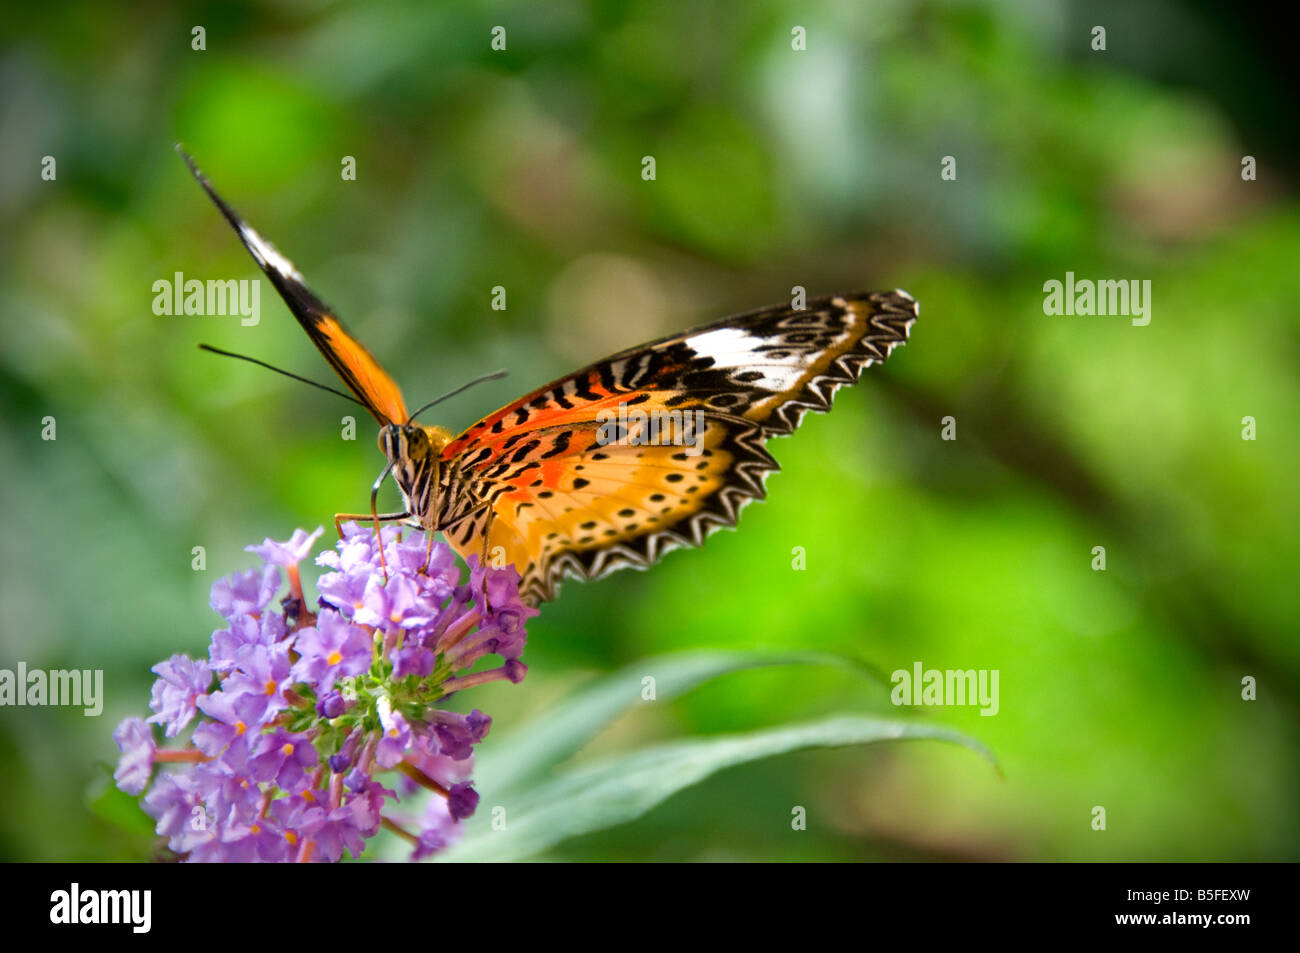 Australia Orange lacewing butterfly taking nectar from flowers in a sunny natural lush habitat Stock Photo